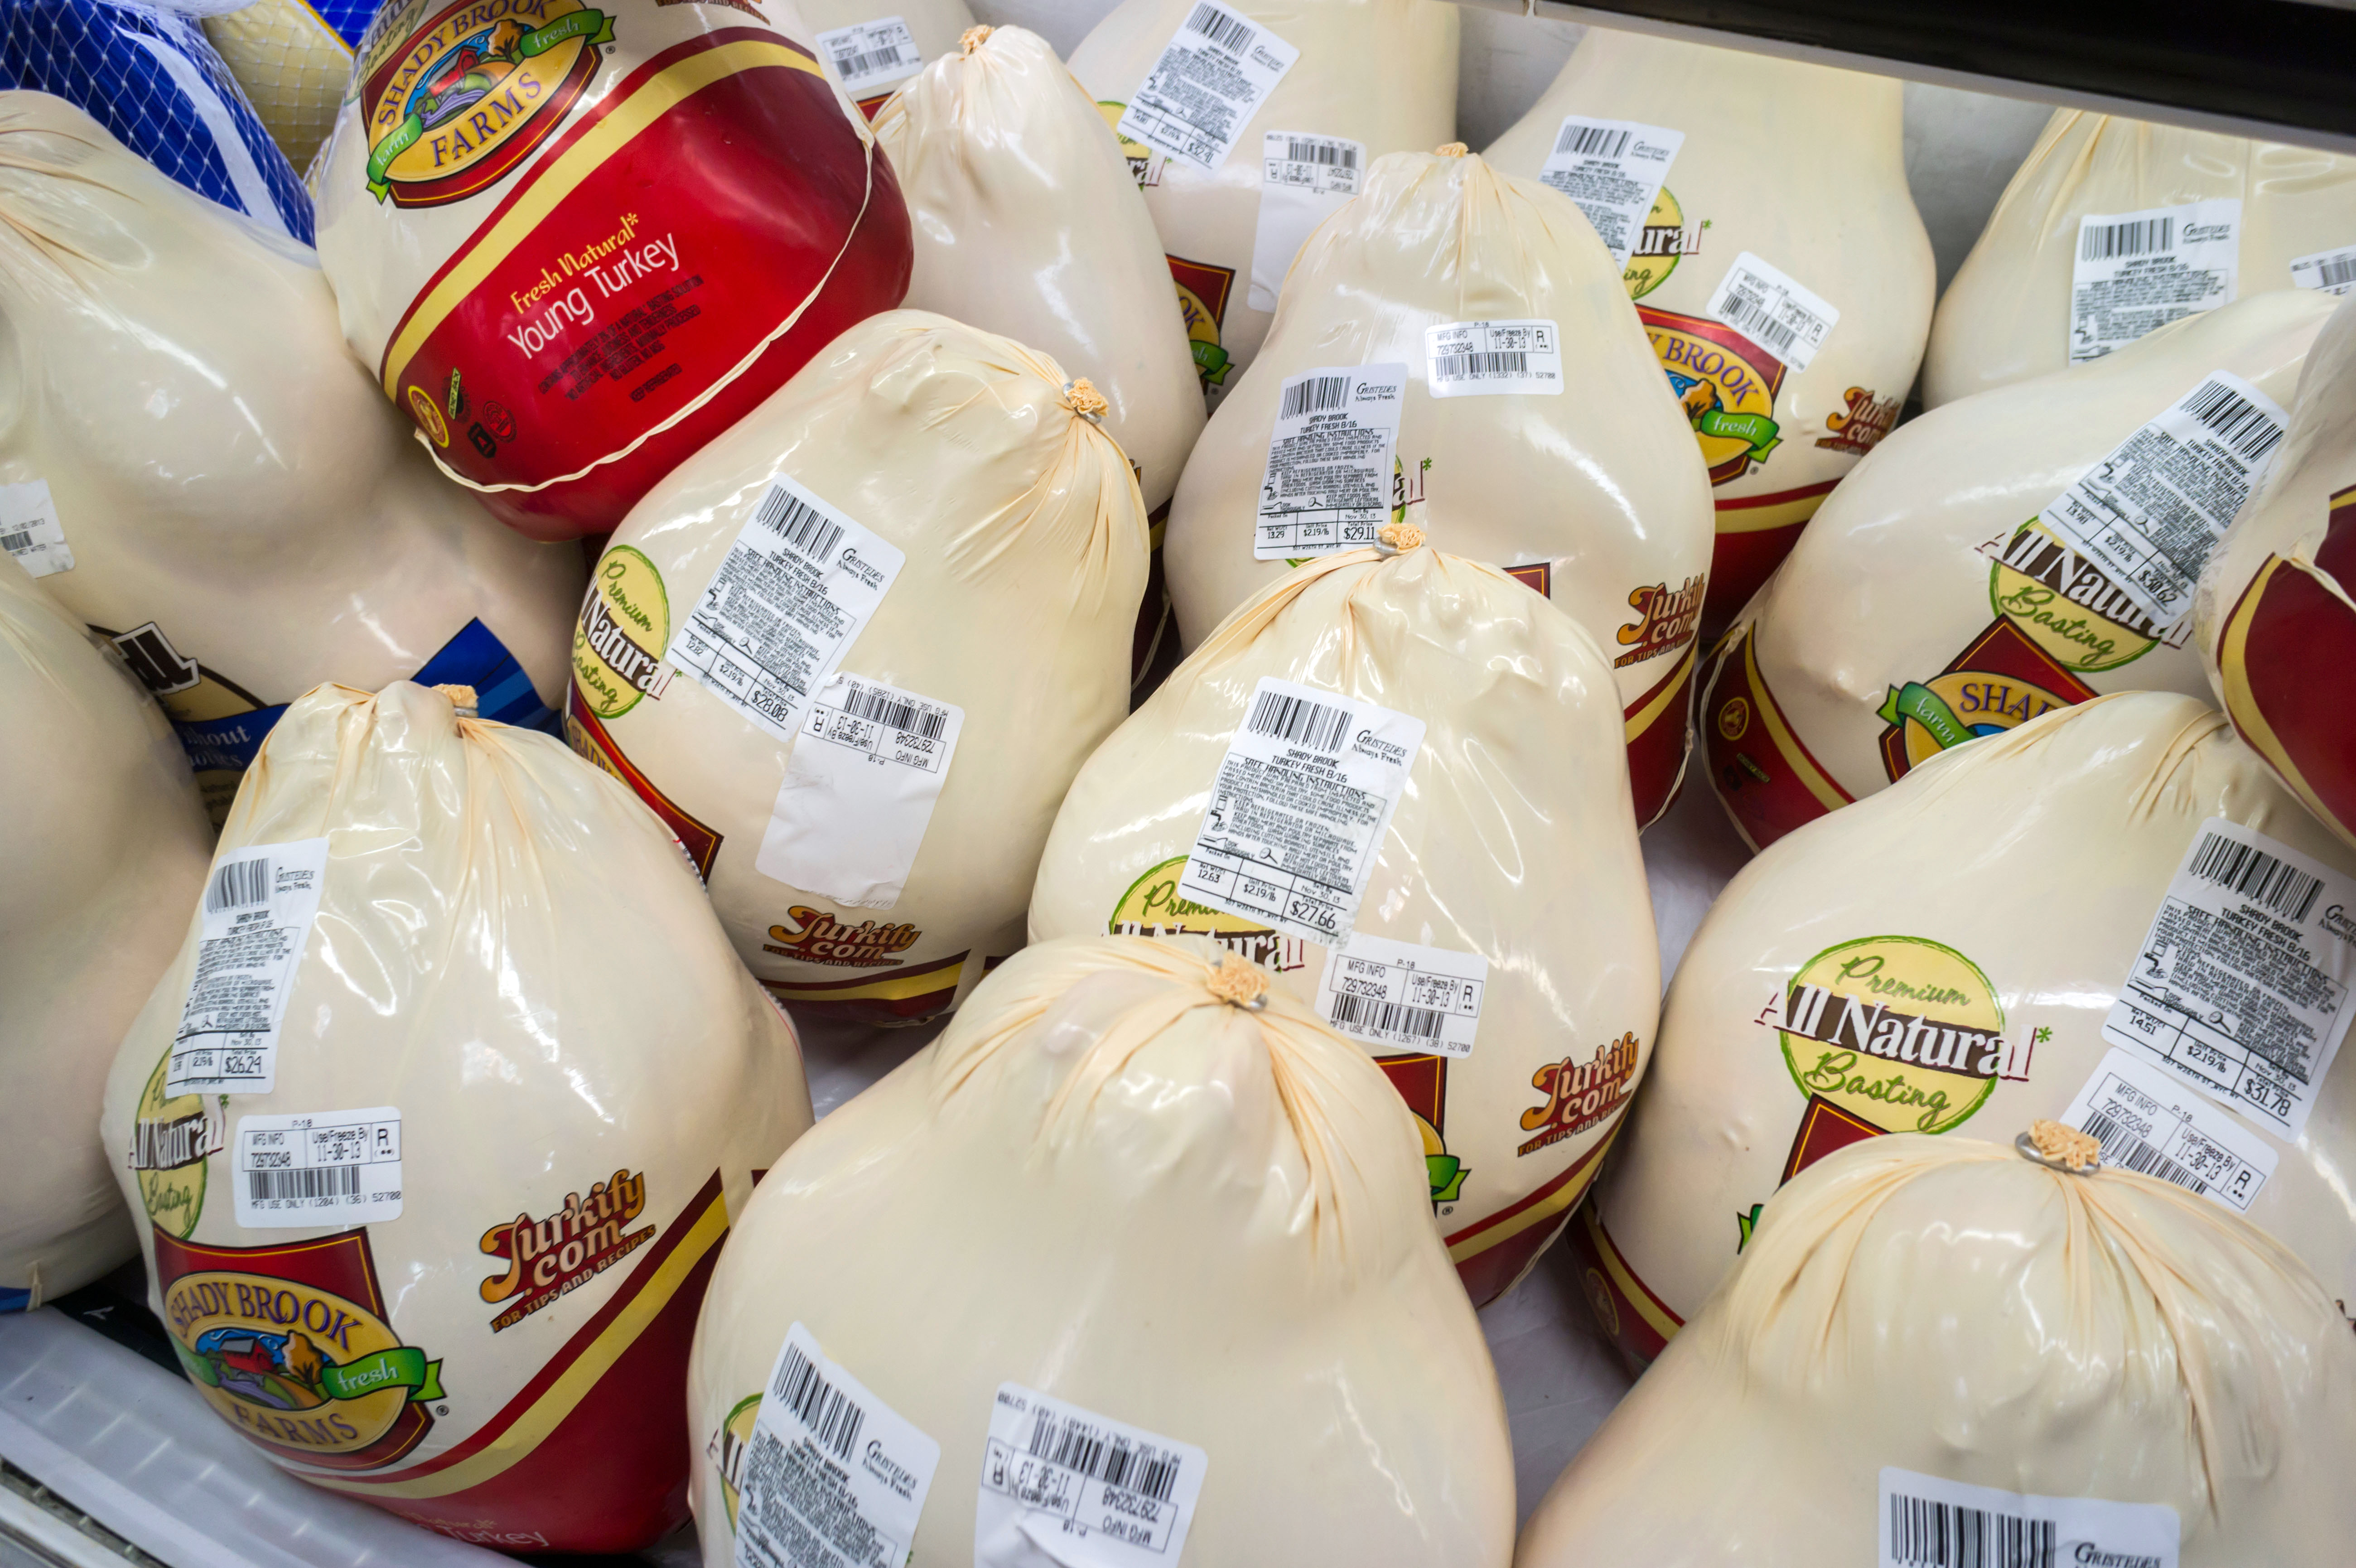 Cheap Turkey Deals Widely Available for Thanksgiving, Despite 'Shortage' Money